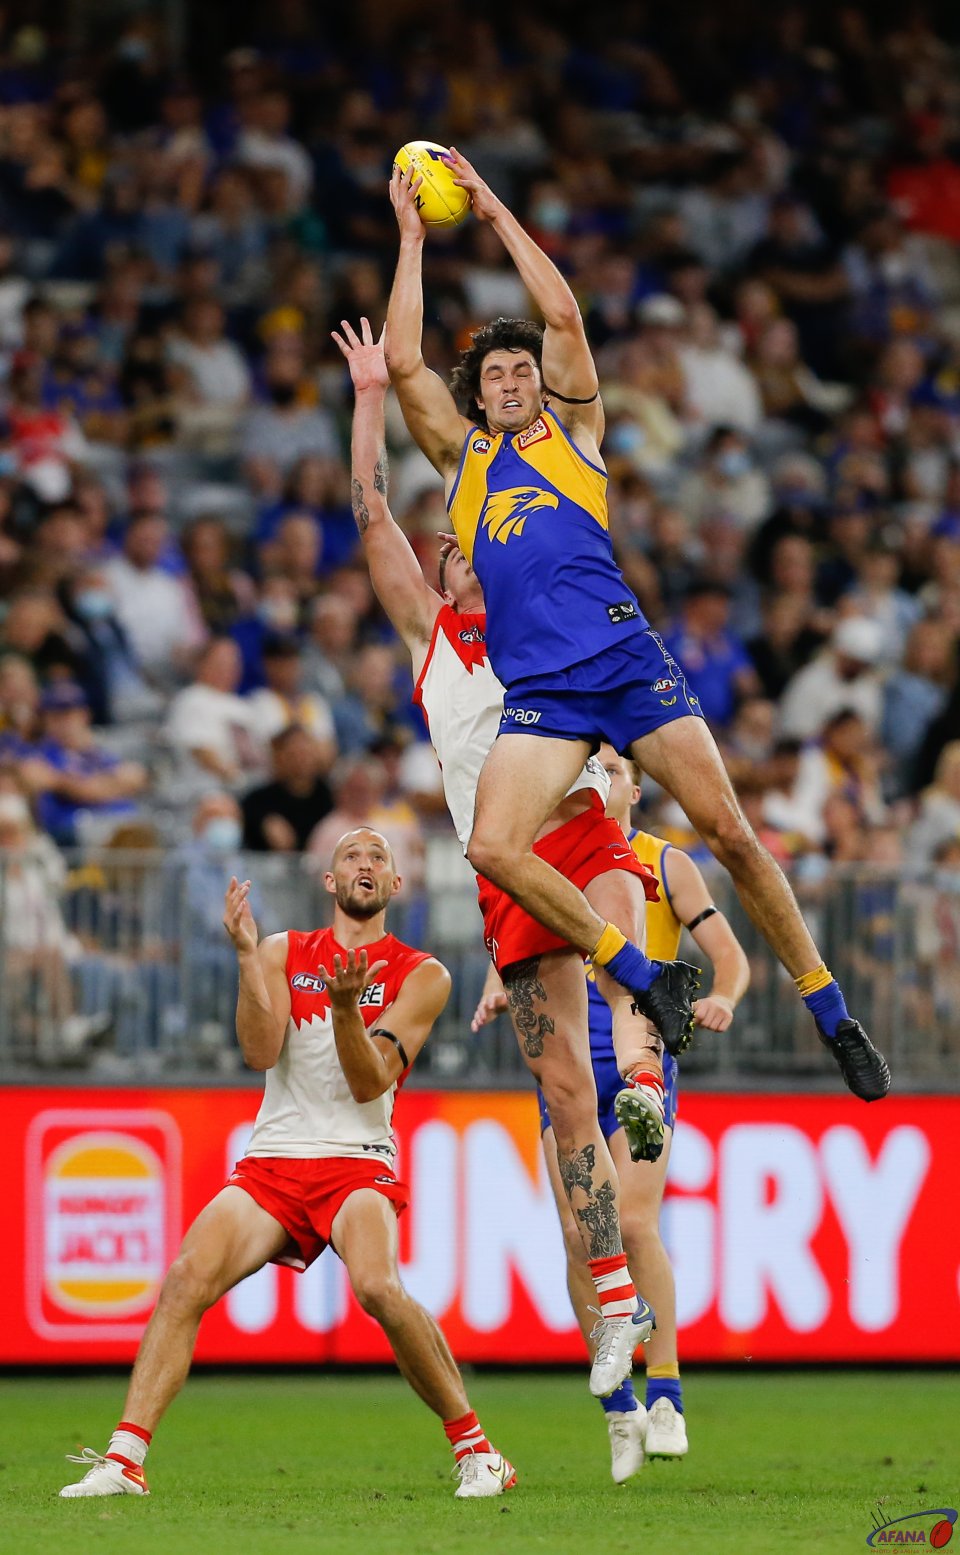 Giant leap from Tom Barrass